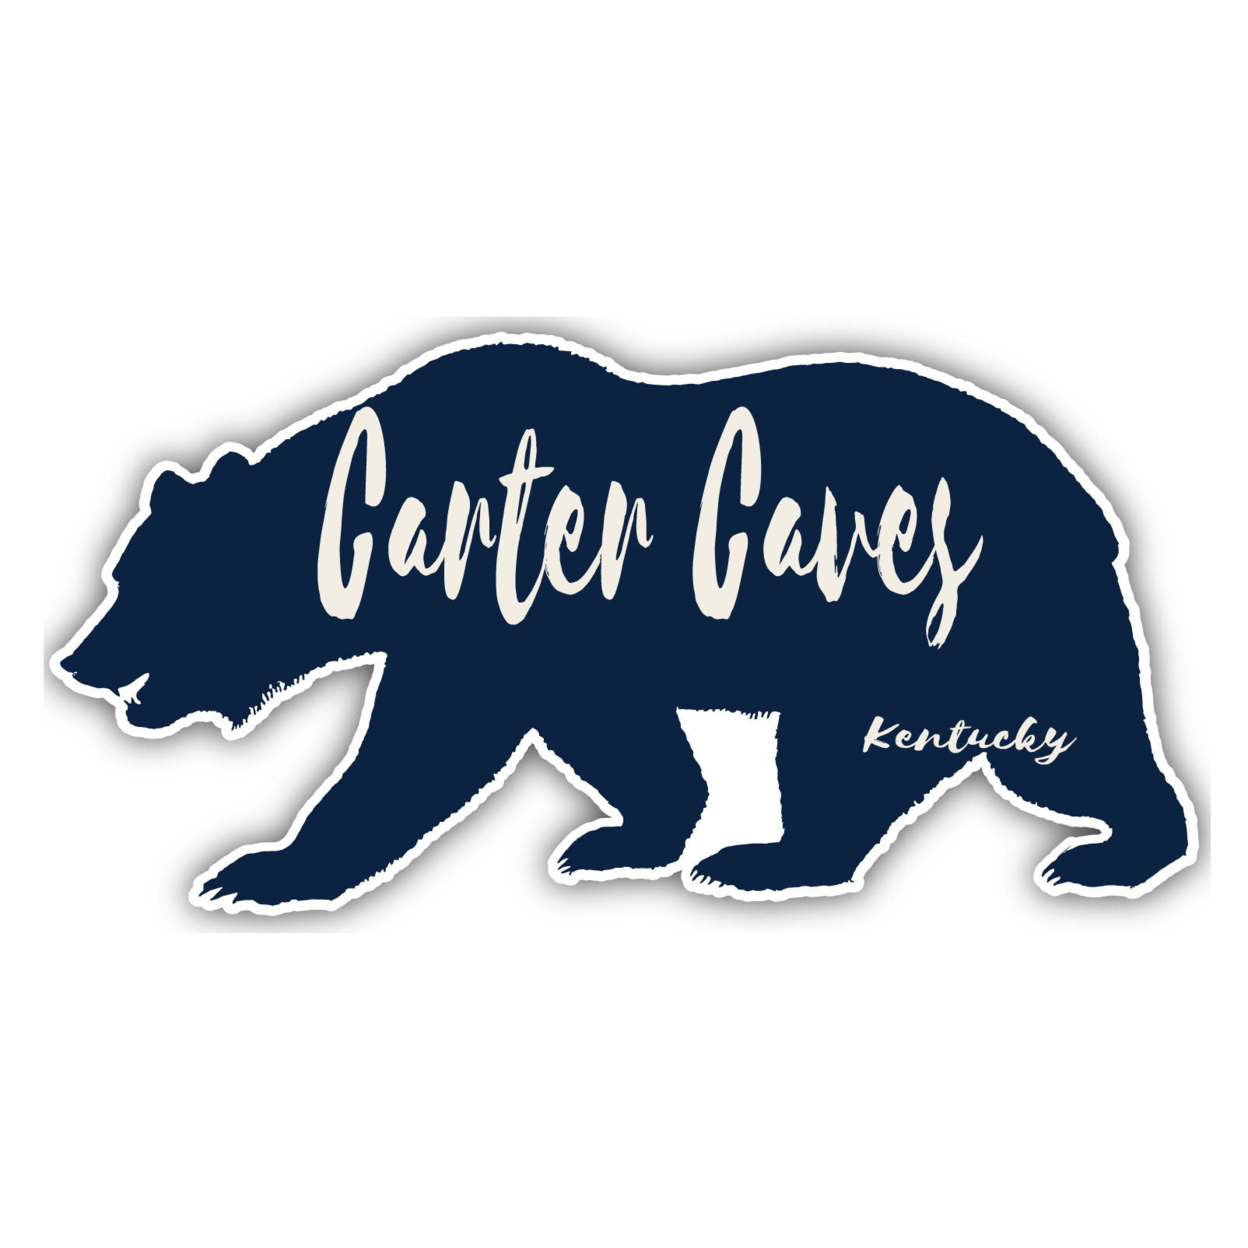 Carter Caves Kentucky Souvenir Decorative Stickers (Choose Theme And Size) - 4-Pack, 12-Inch, Bear